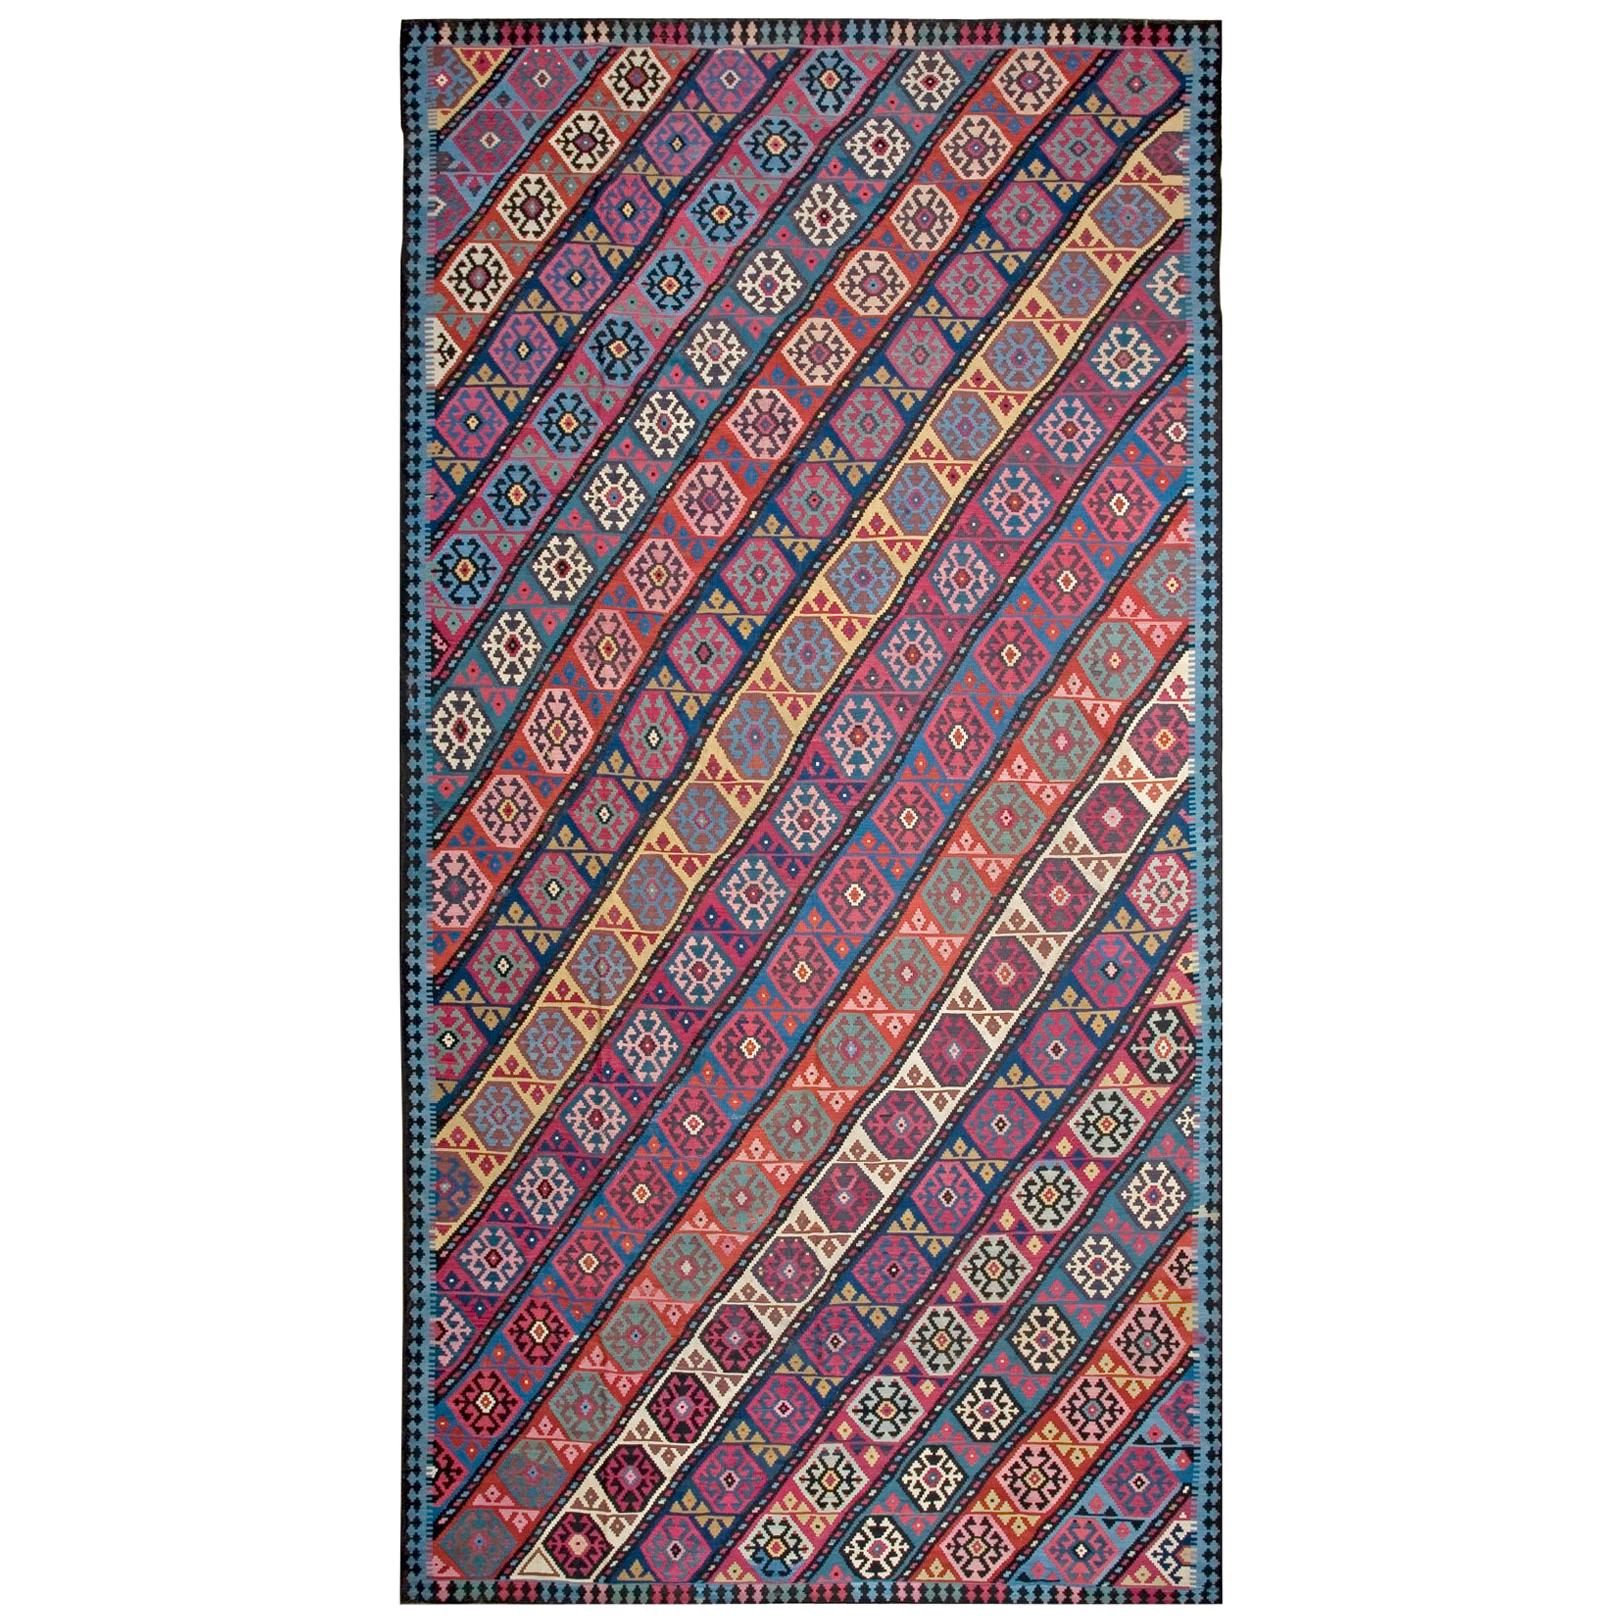 19th Century Over-Size Caucasian Flat-Weave ( 9' x 18' - 274 x 548 cm ) For Sale